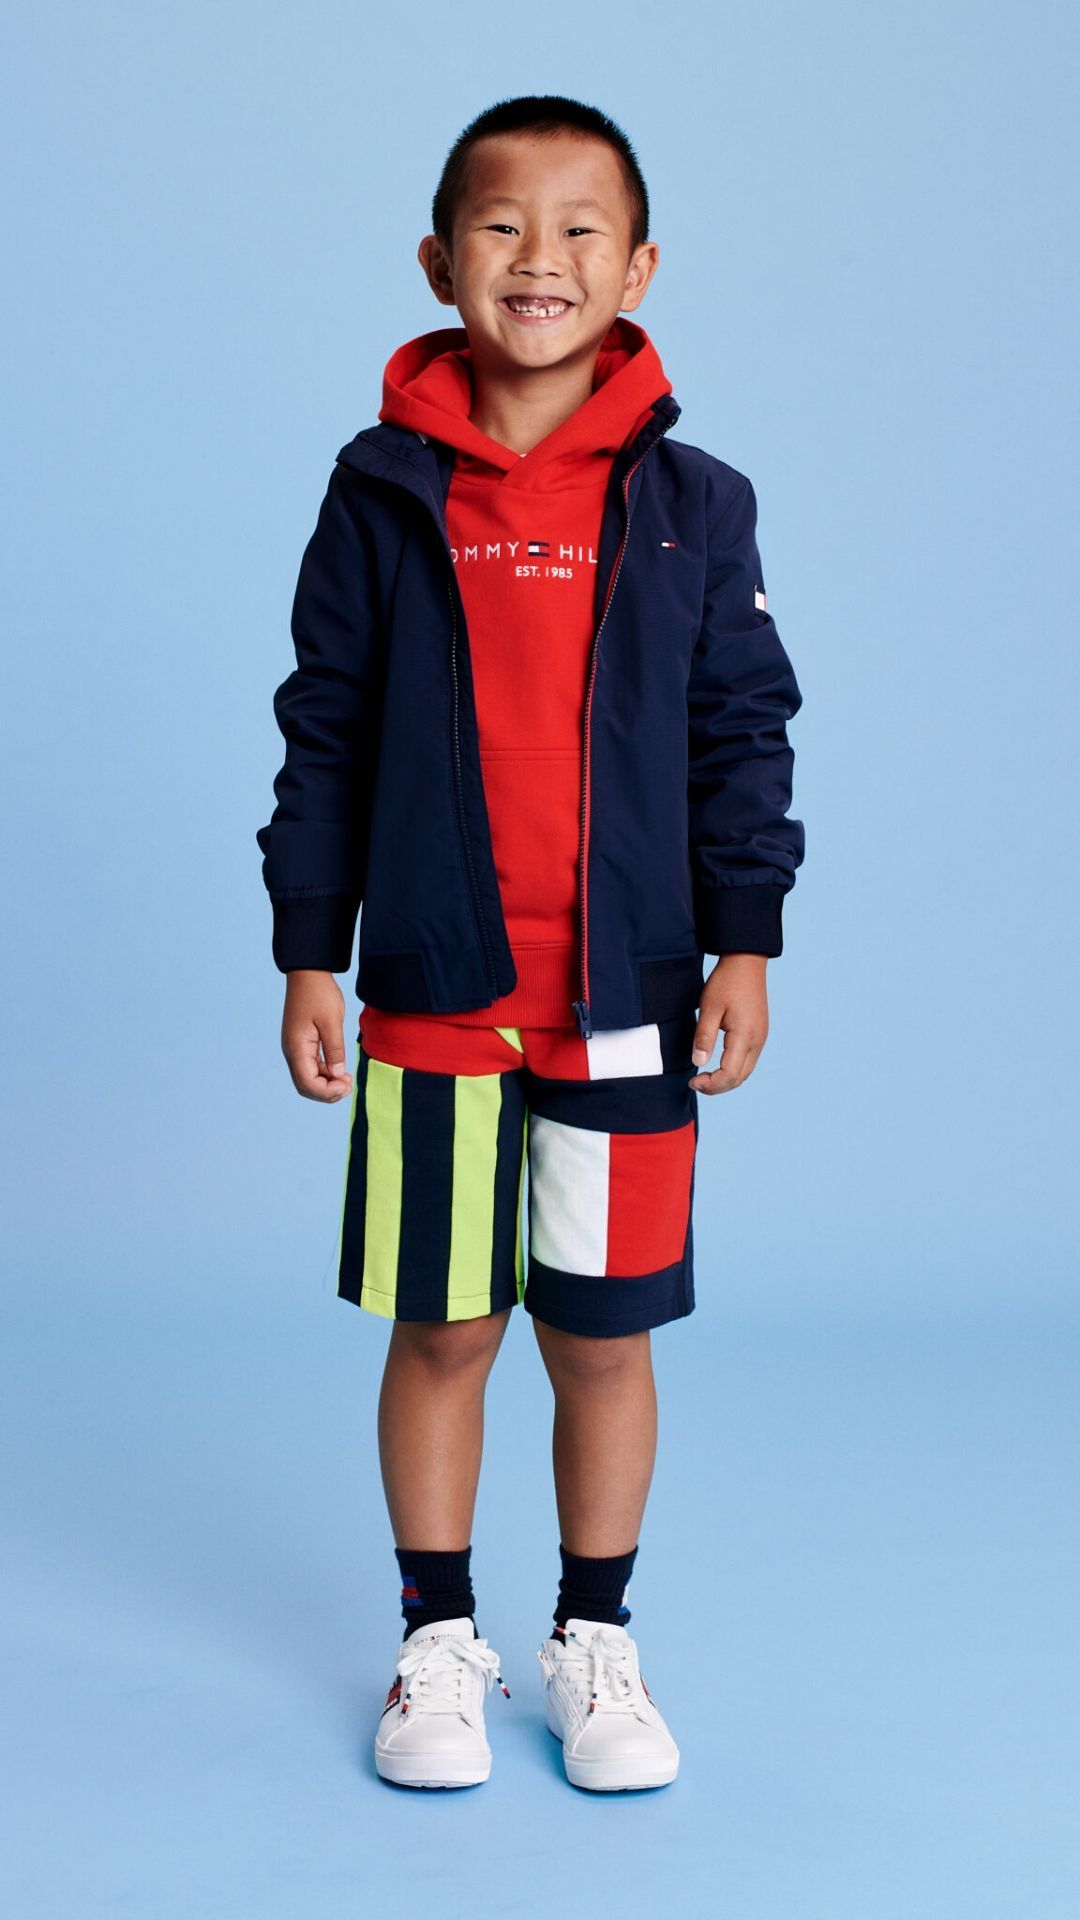 Tommy Hilfiger Has Launched The Coolest Kid's Collection For 2020 Harper's Arabia